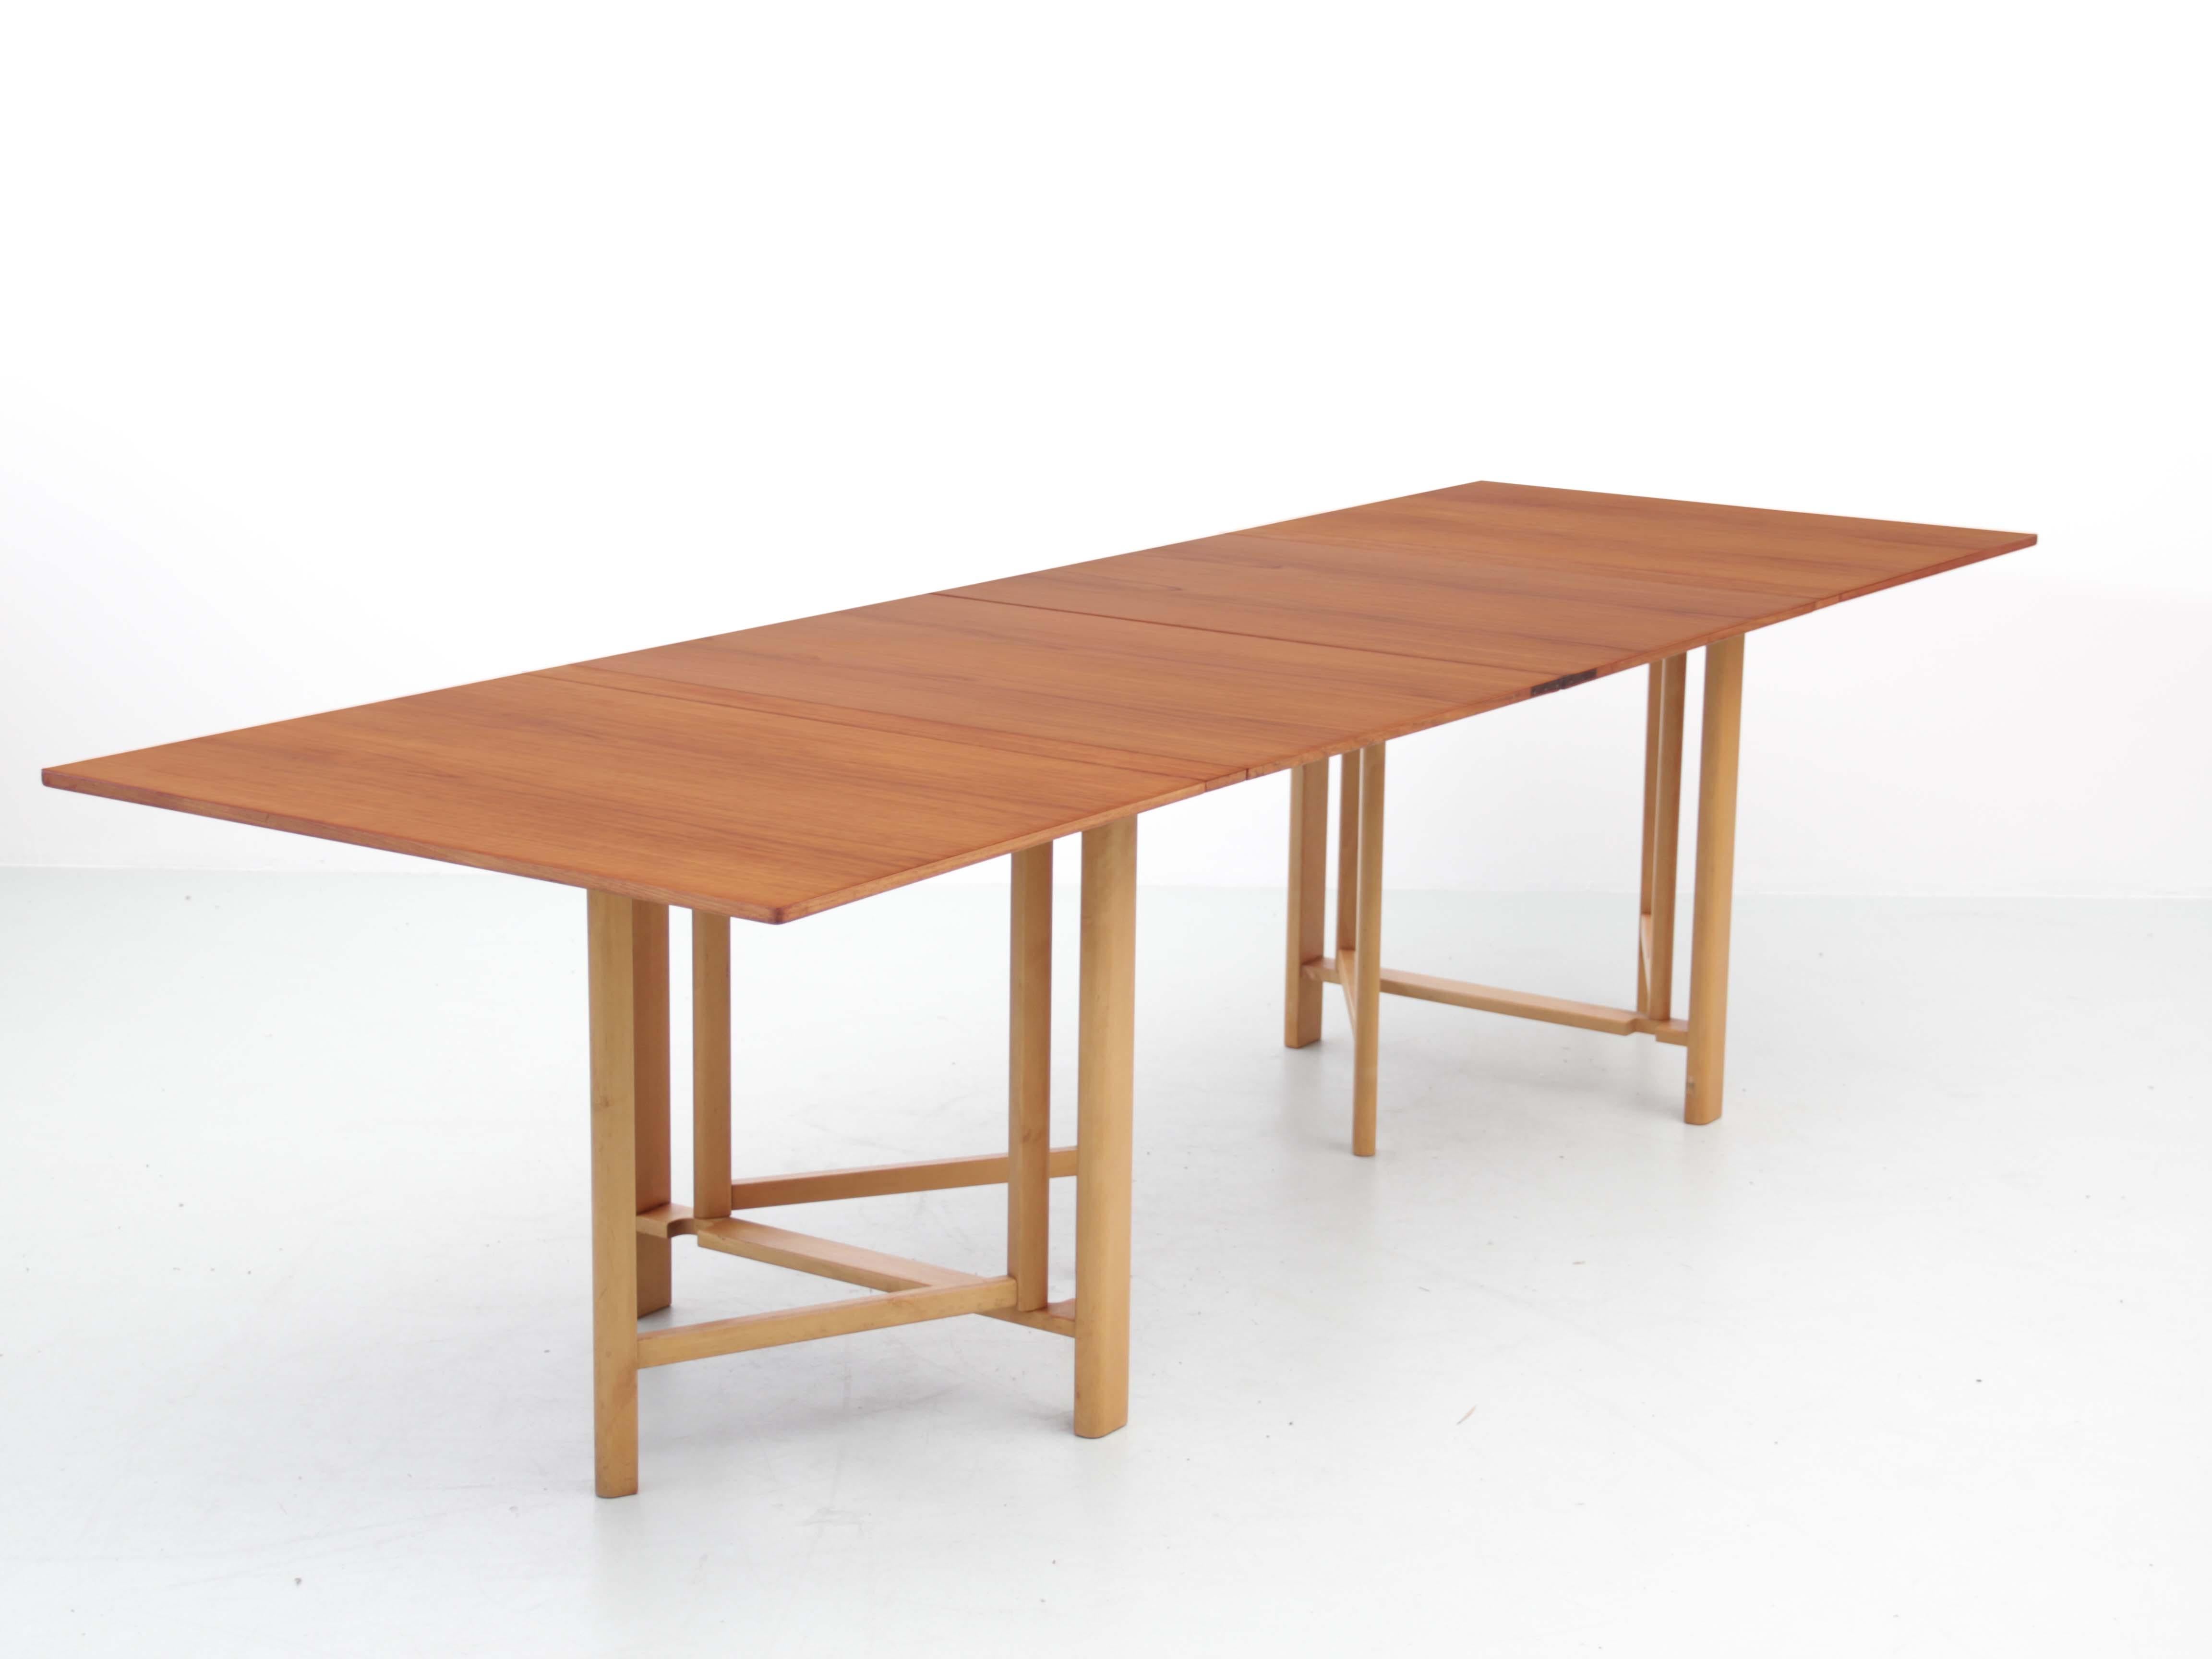 Dining table “Maria Flap” designed by Bruno Mathsson for Mathsson International, Sweden. 1960.